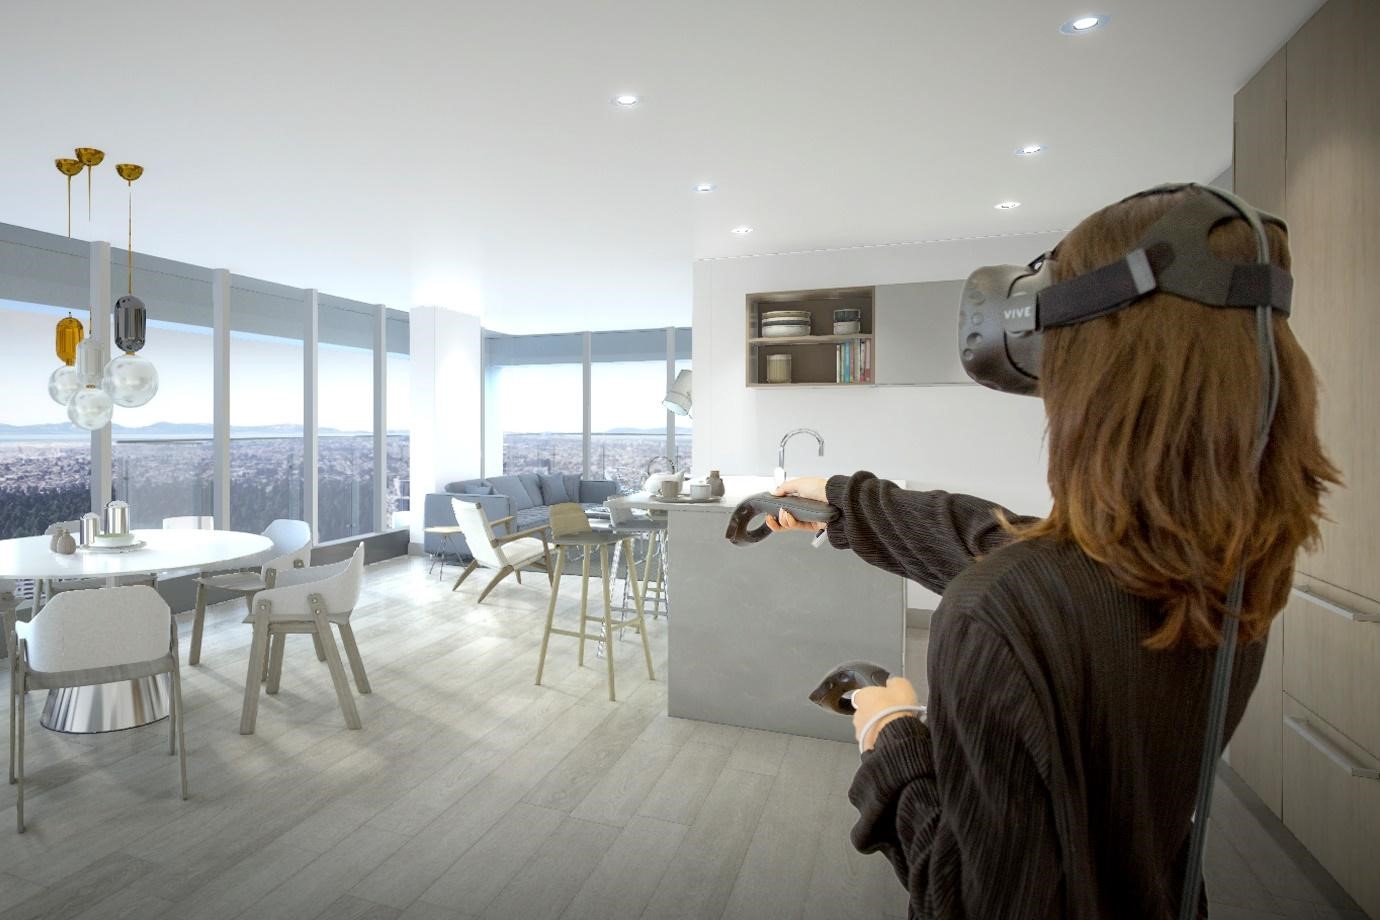 The use of VR in office design